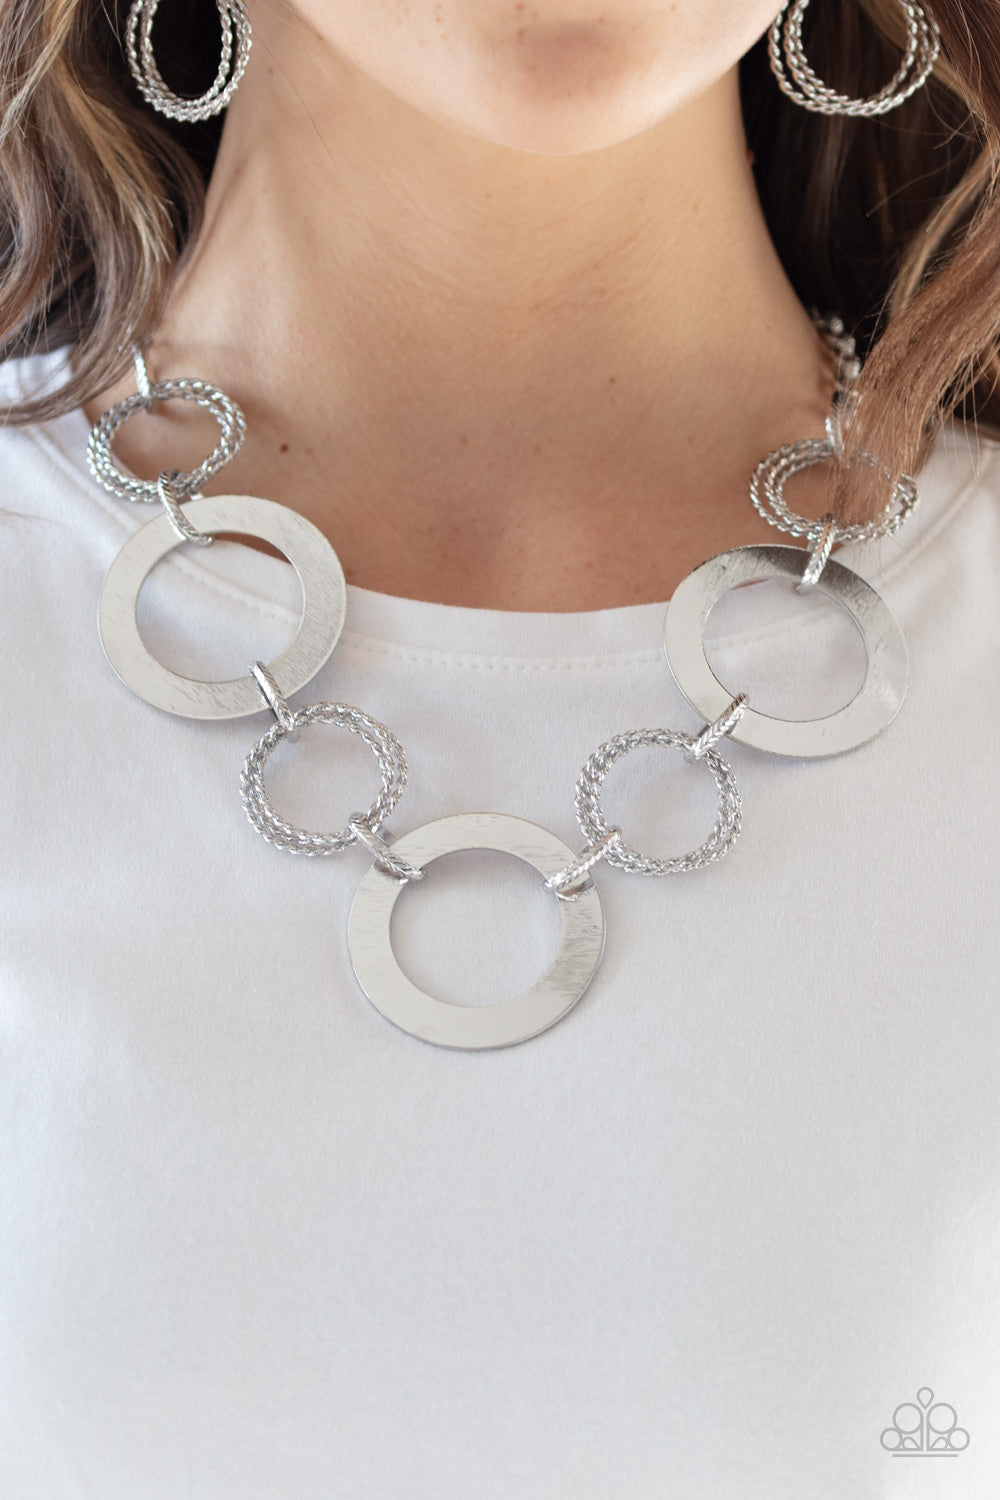 Paparazzi Accessories - Ringed in Radiance - Silver Necklace